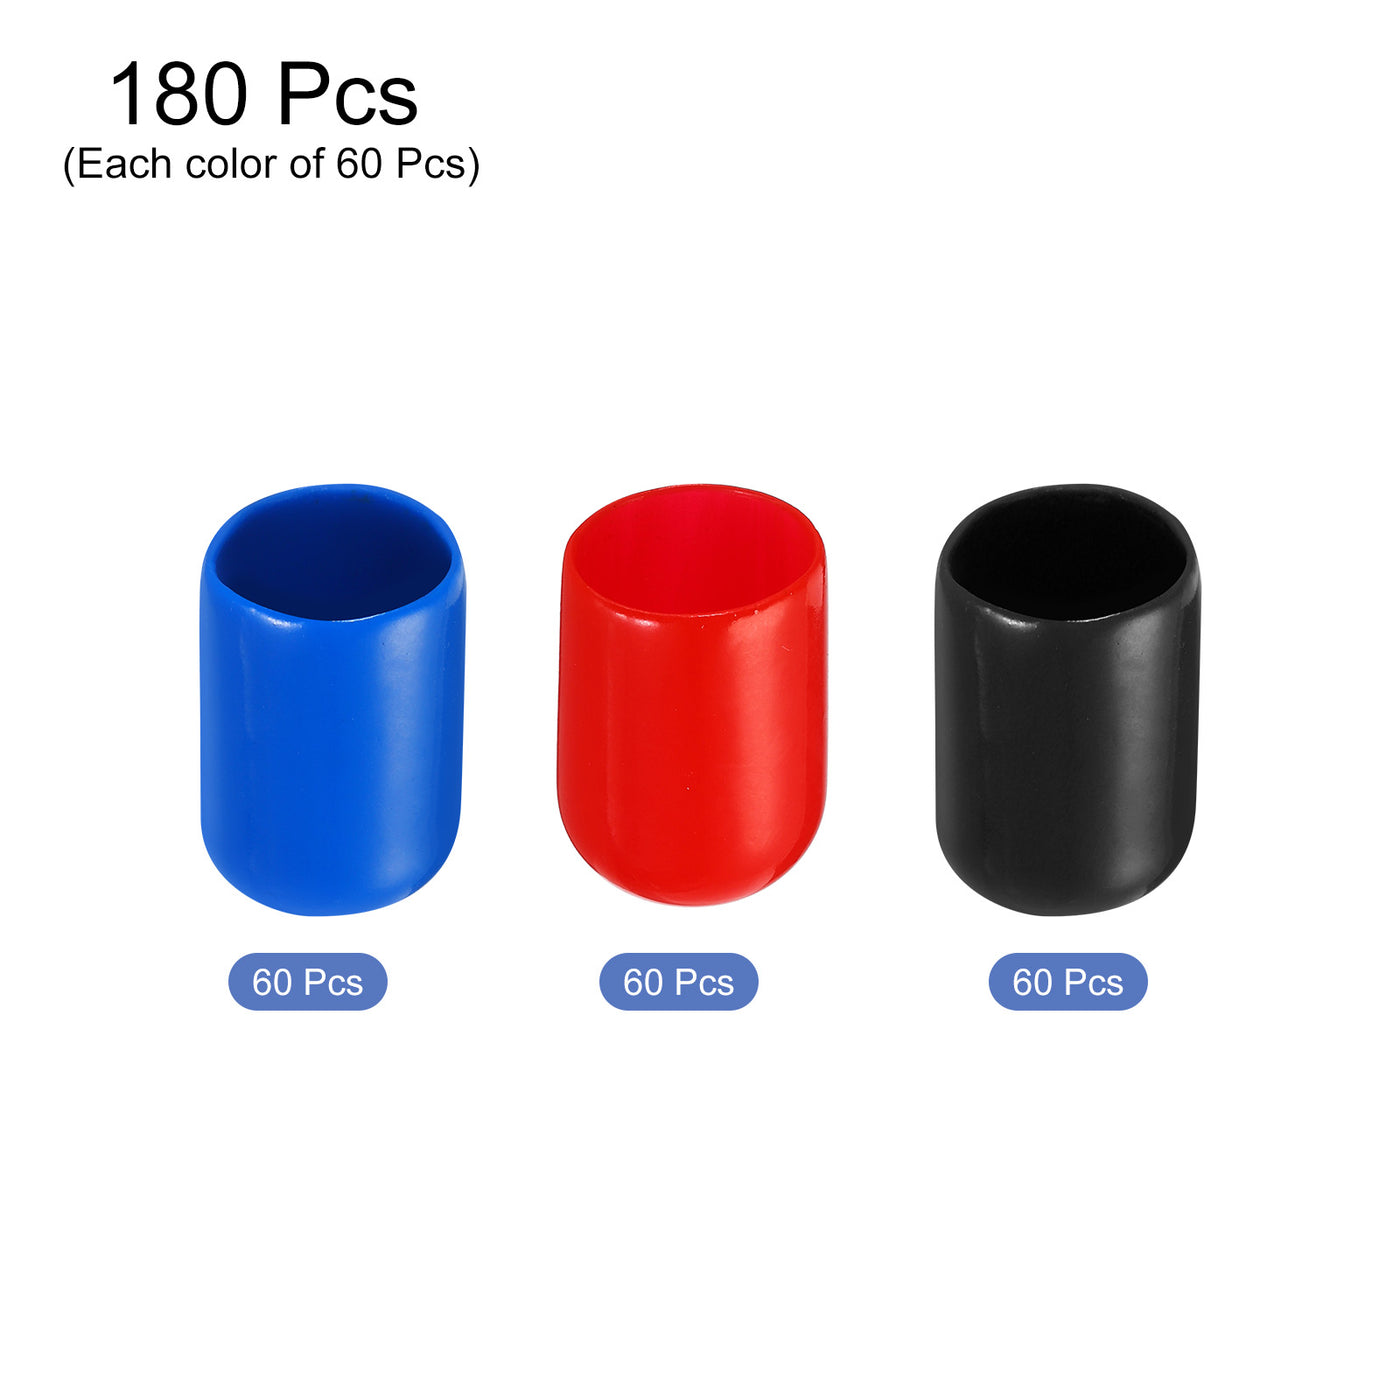 uxcell Uxcell 180pcs Rubber End Caps 14mm ID Vinyl PVC Round Tube Bolt Cap Cover Screw Thread Protectors, Black Red Blue